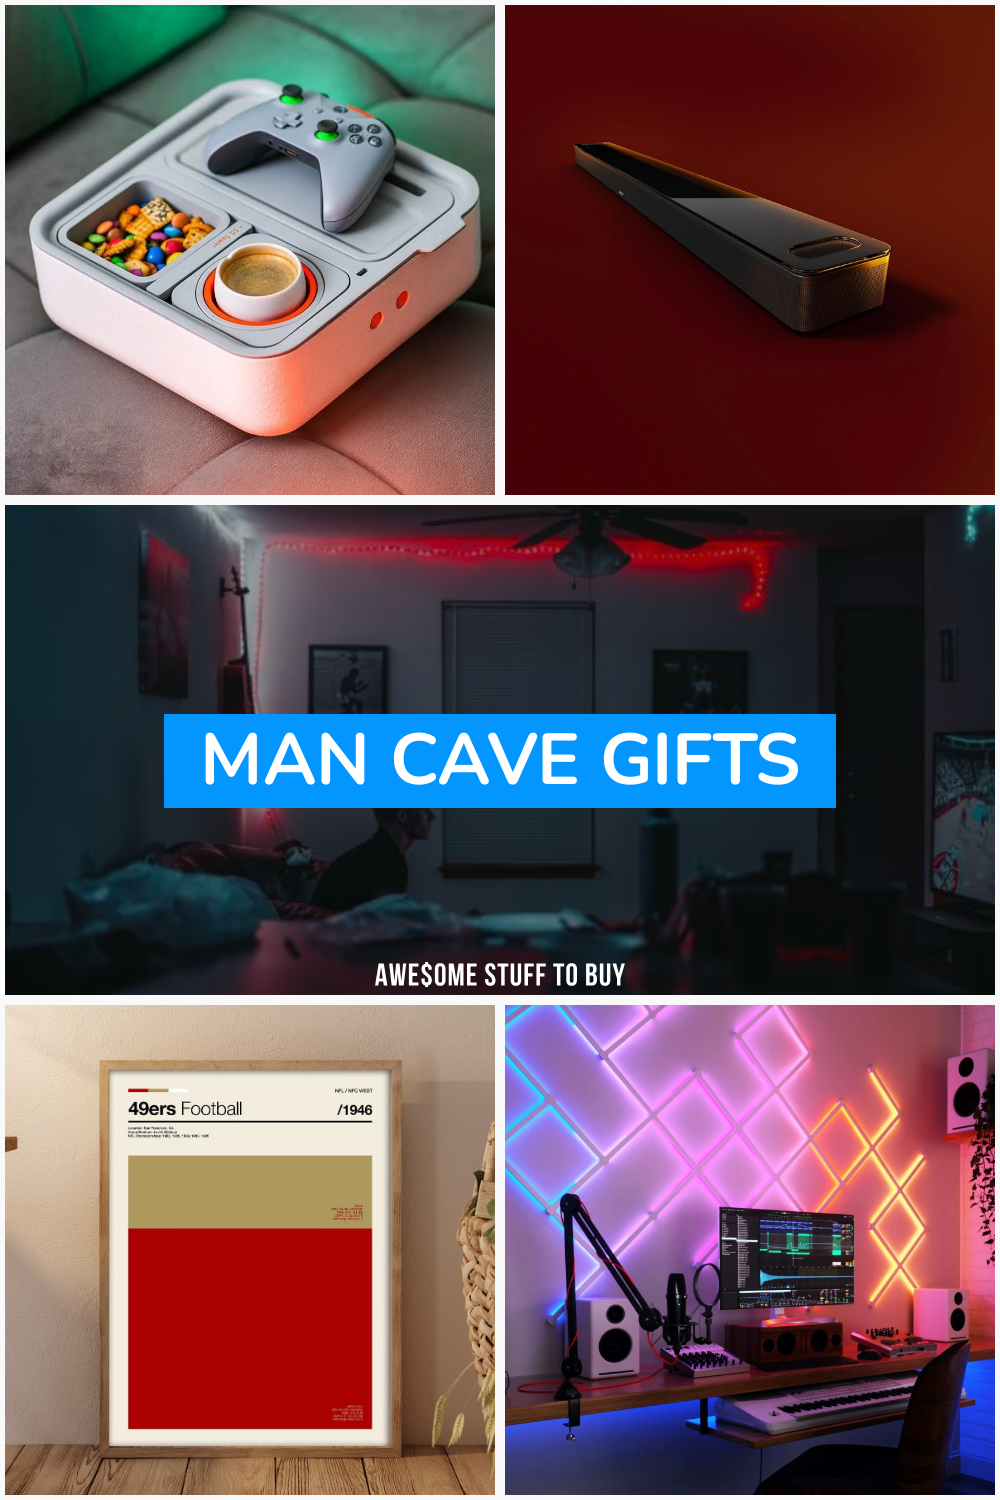 Man Cave Gifts // Awesome Stuff to Buy